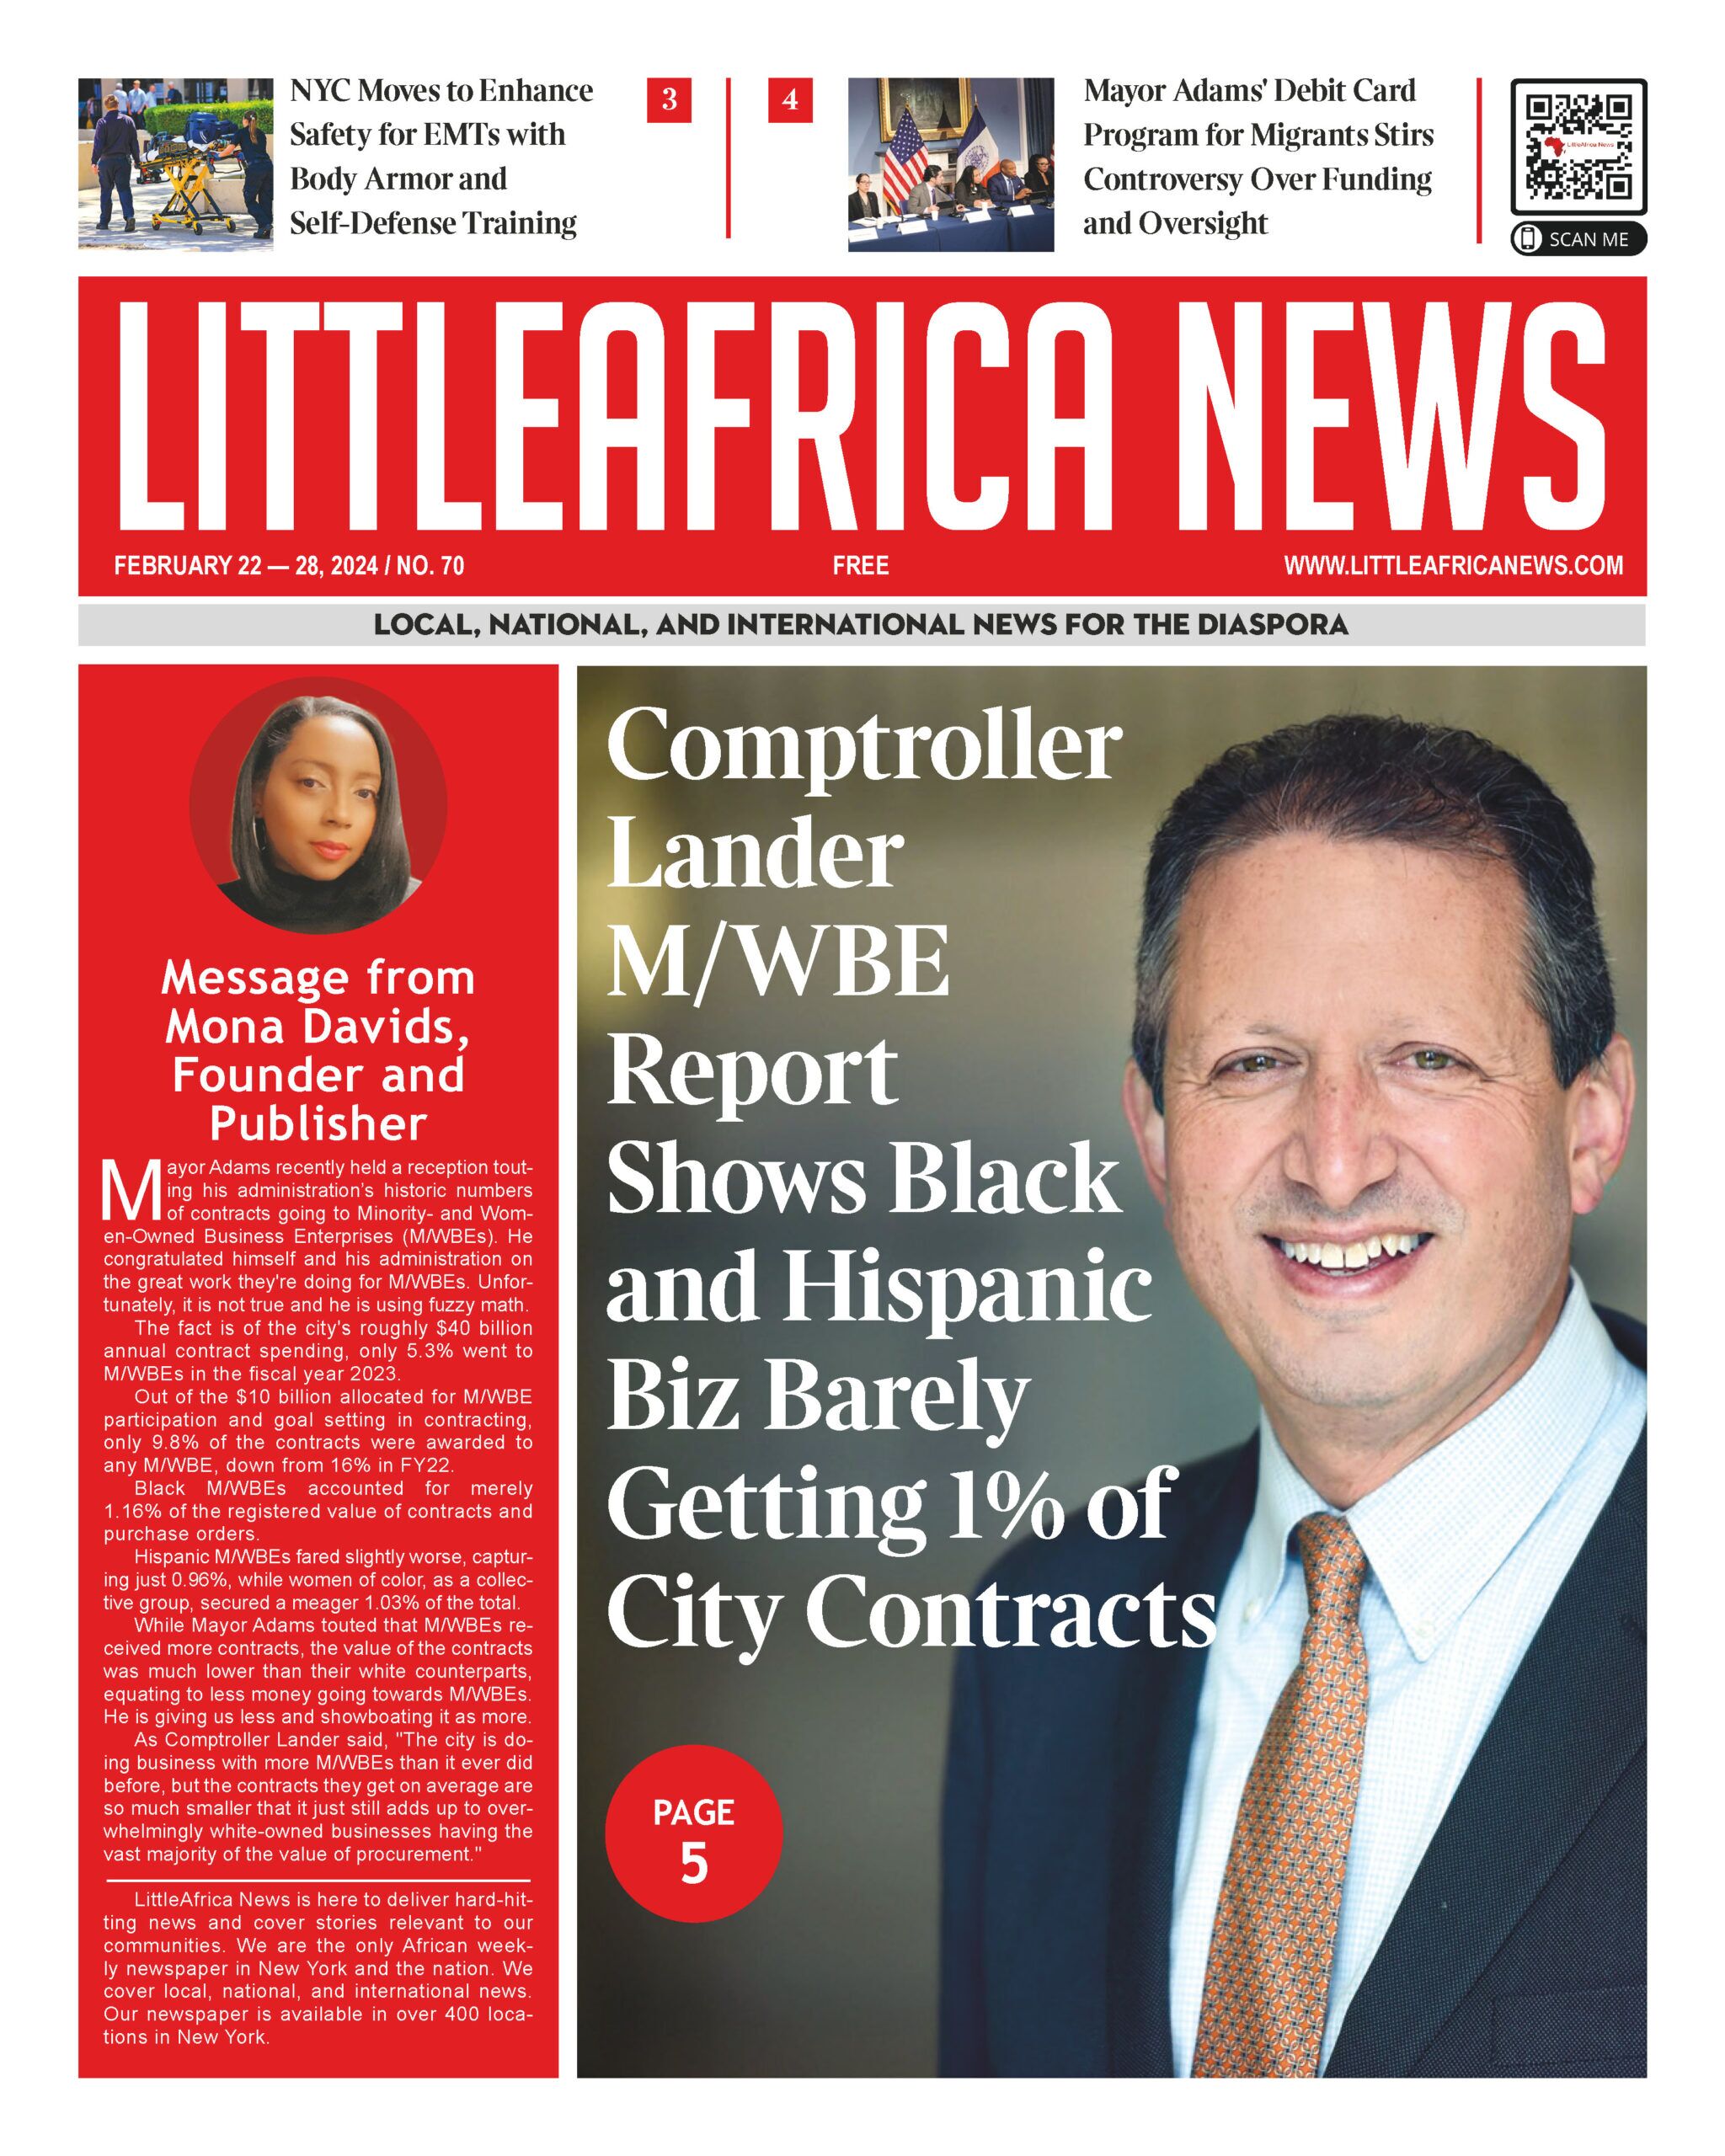 LittleAfrica News Newspaper_FrontPage_February22-28_2024